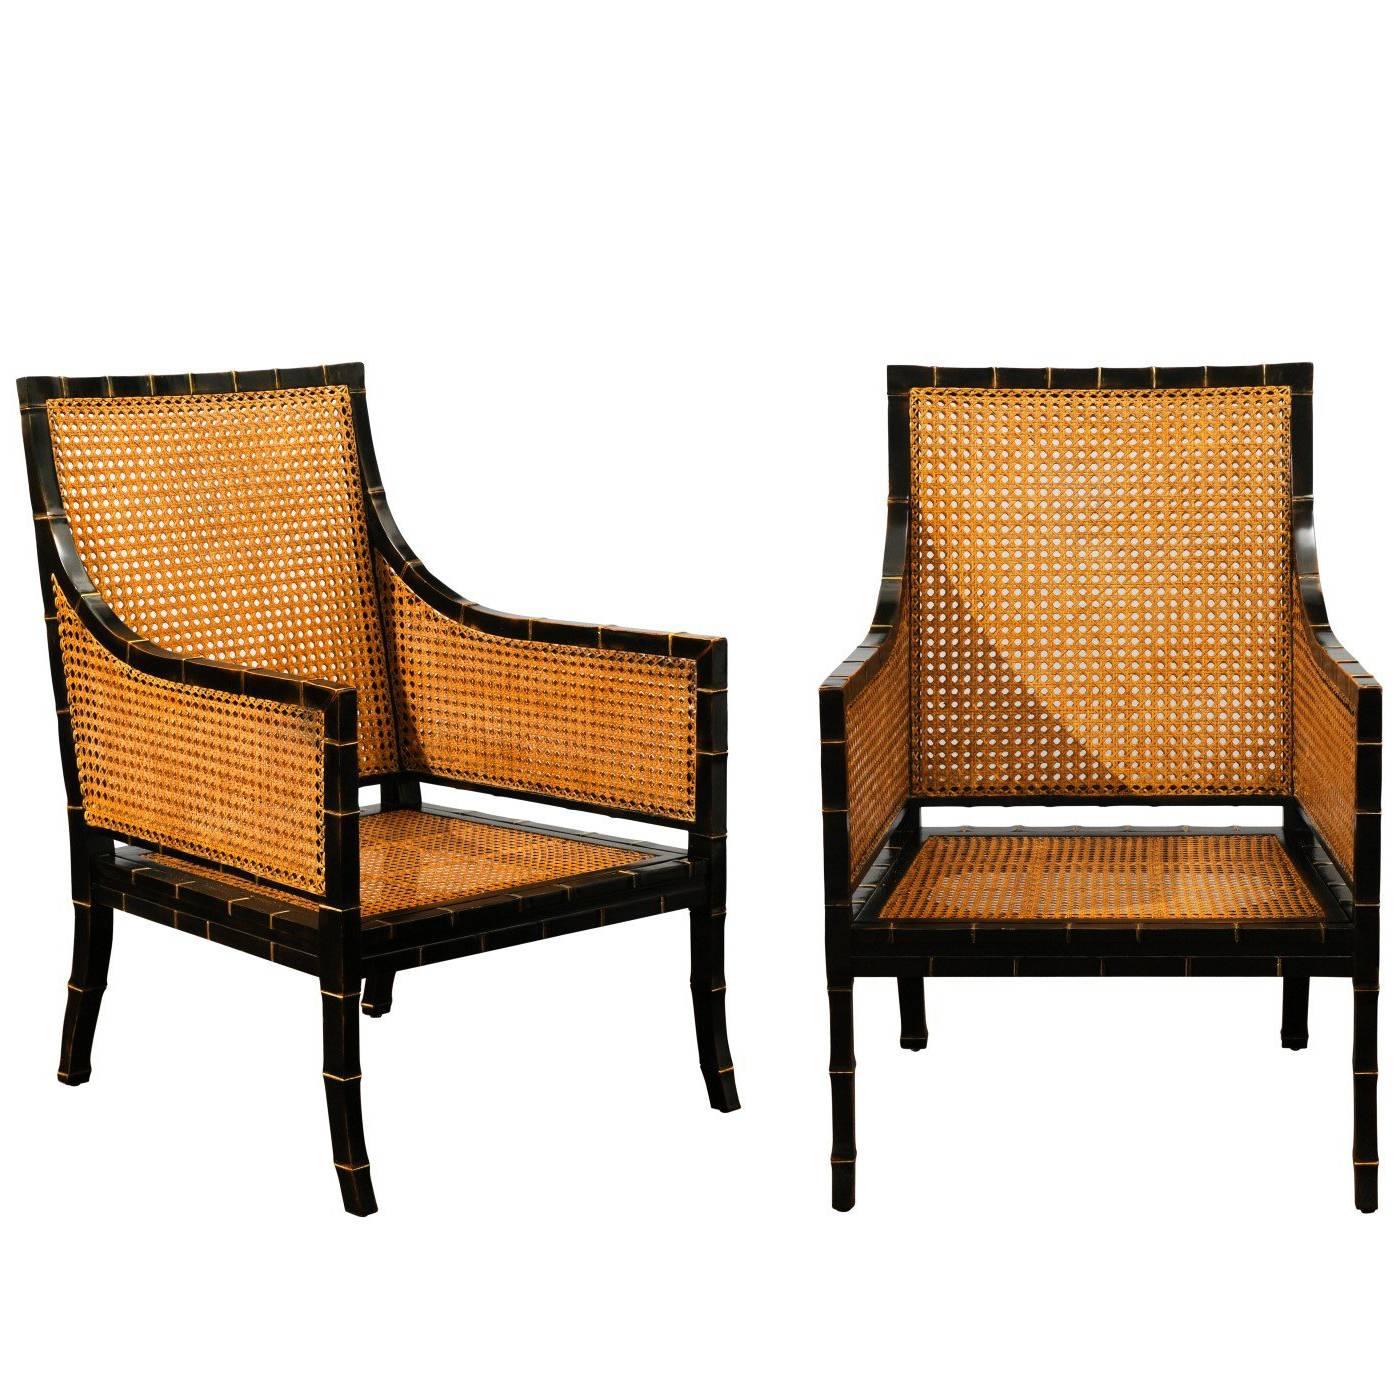 Beautiful Restored Pair of Large Scale Double-Sided Cane Club Chairs